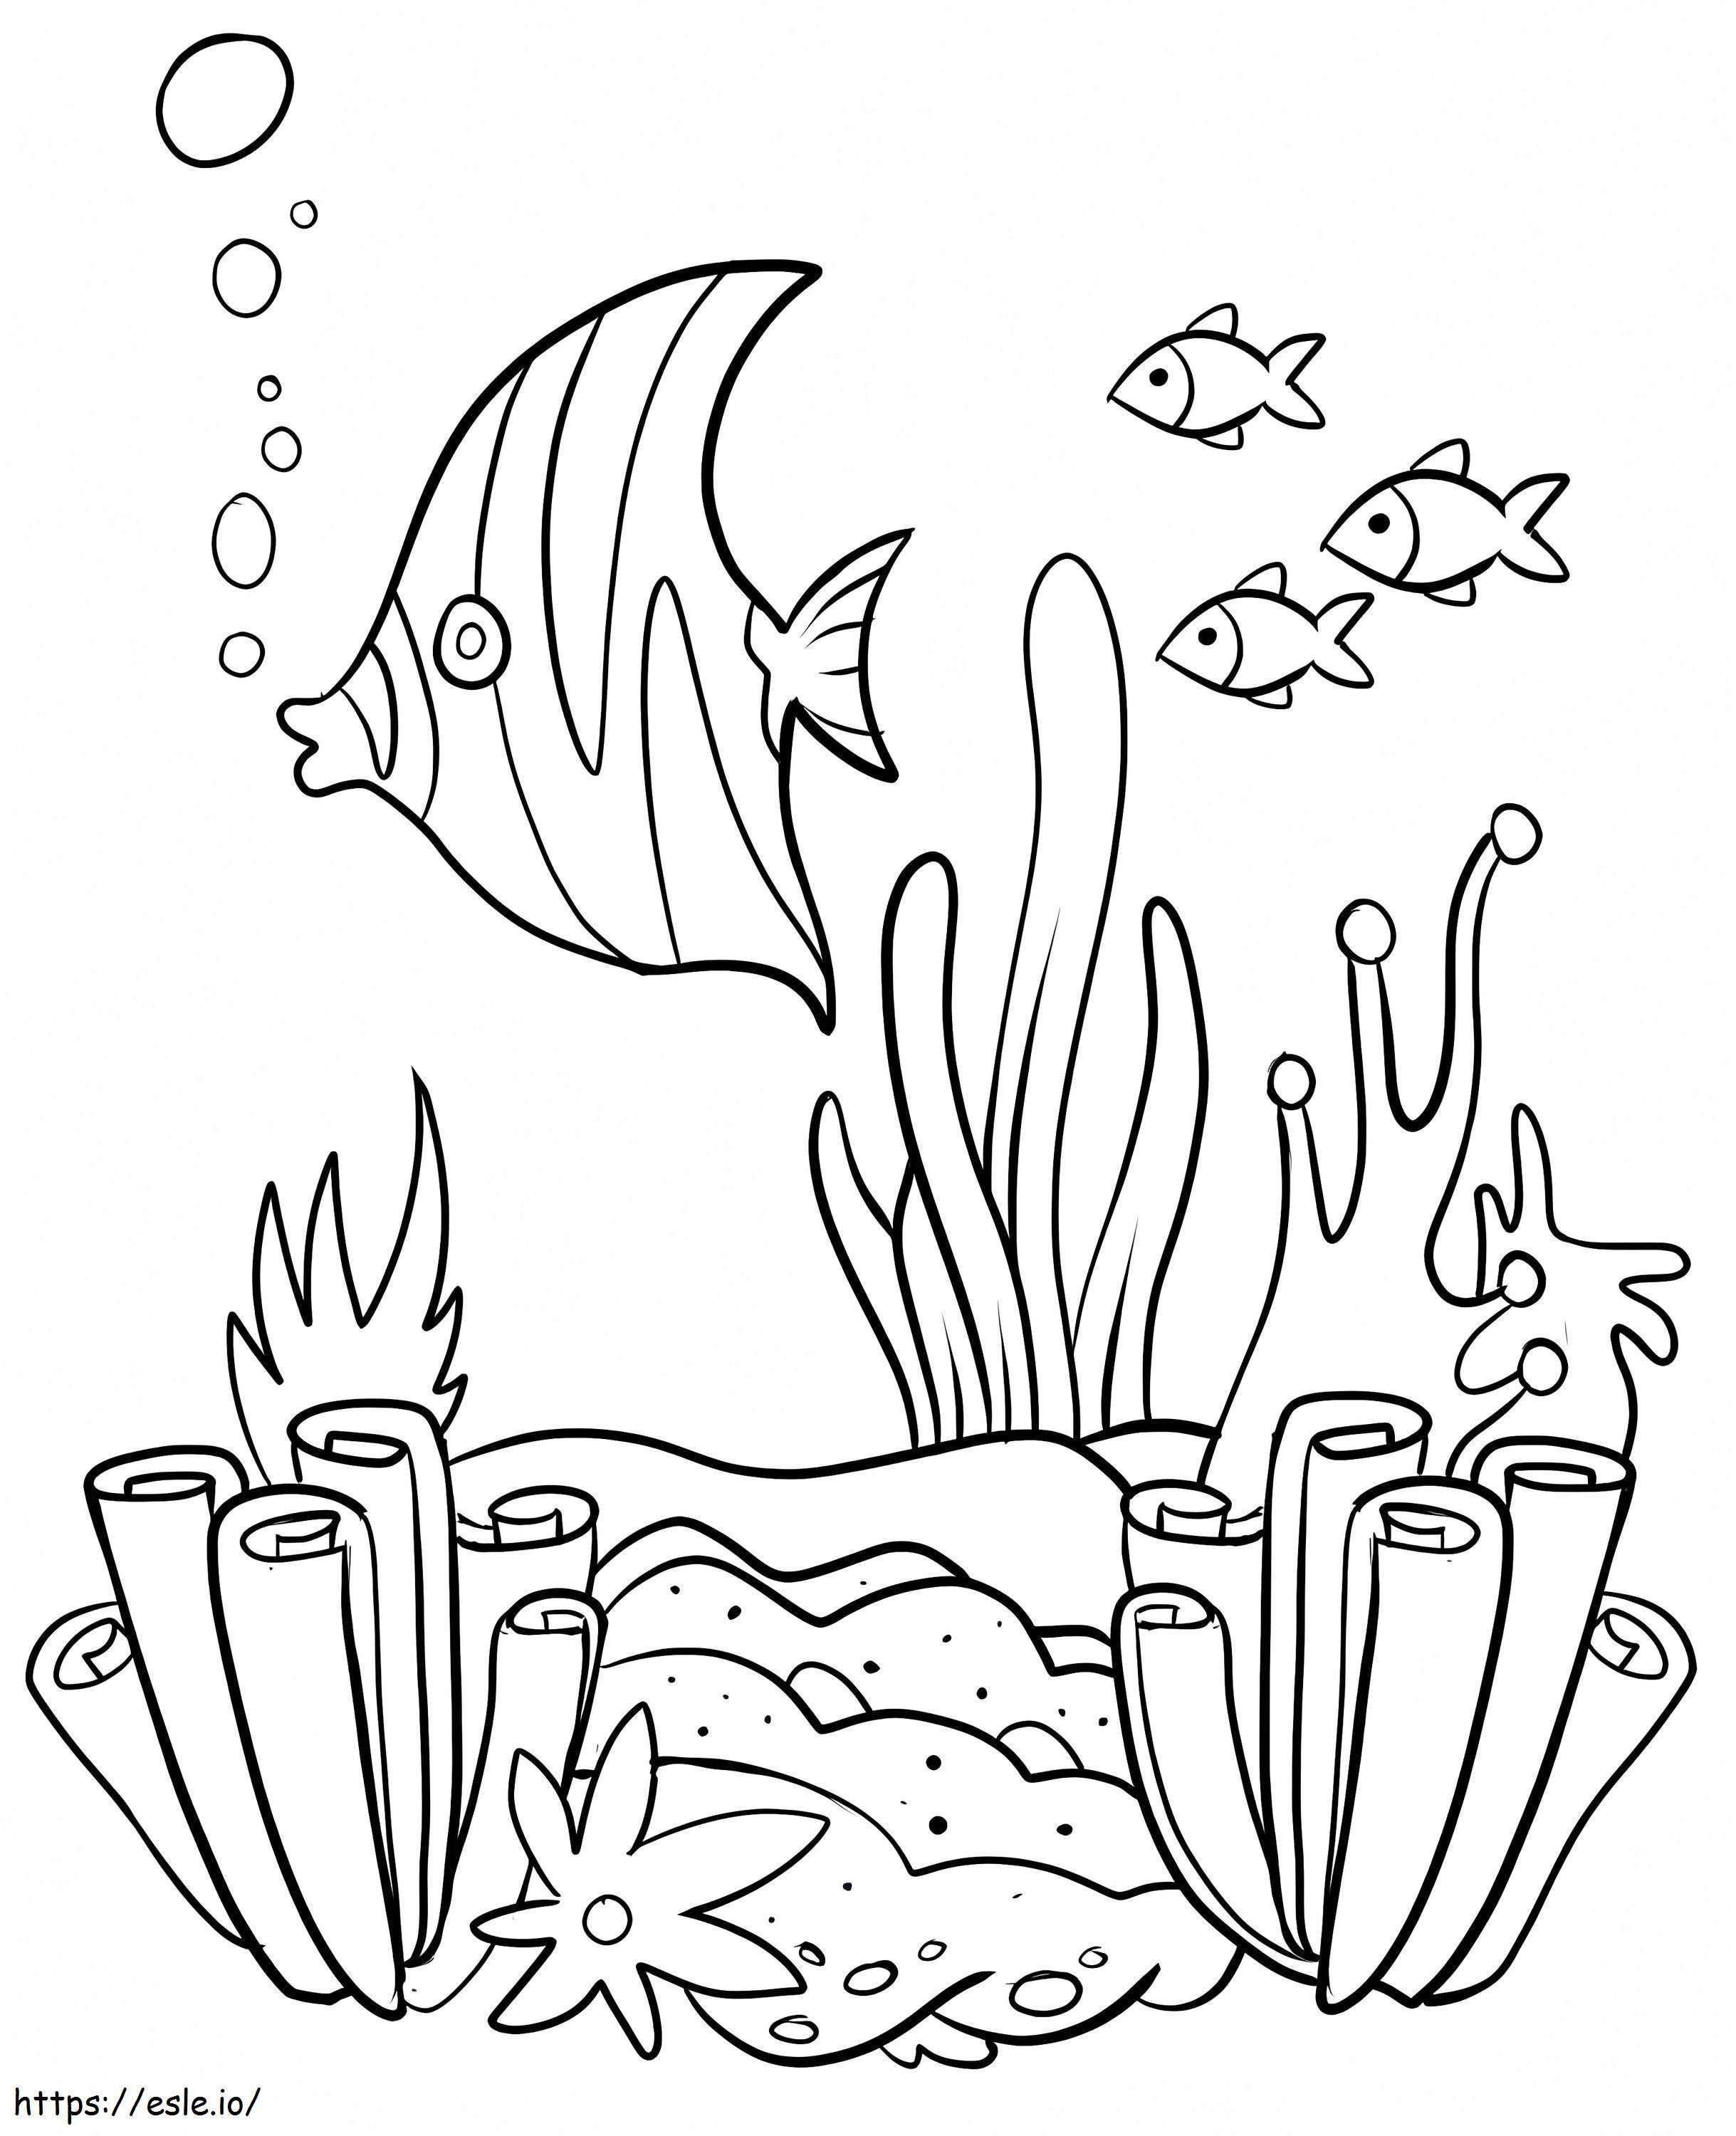 Coral Reef And Fishes coloring page